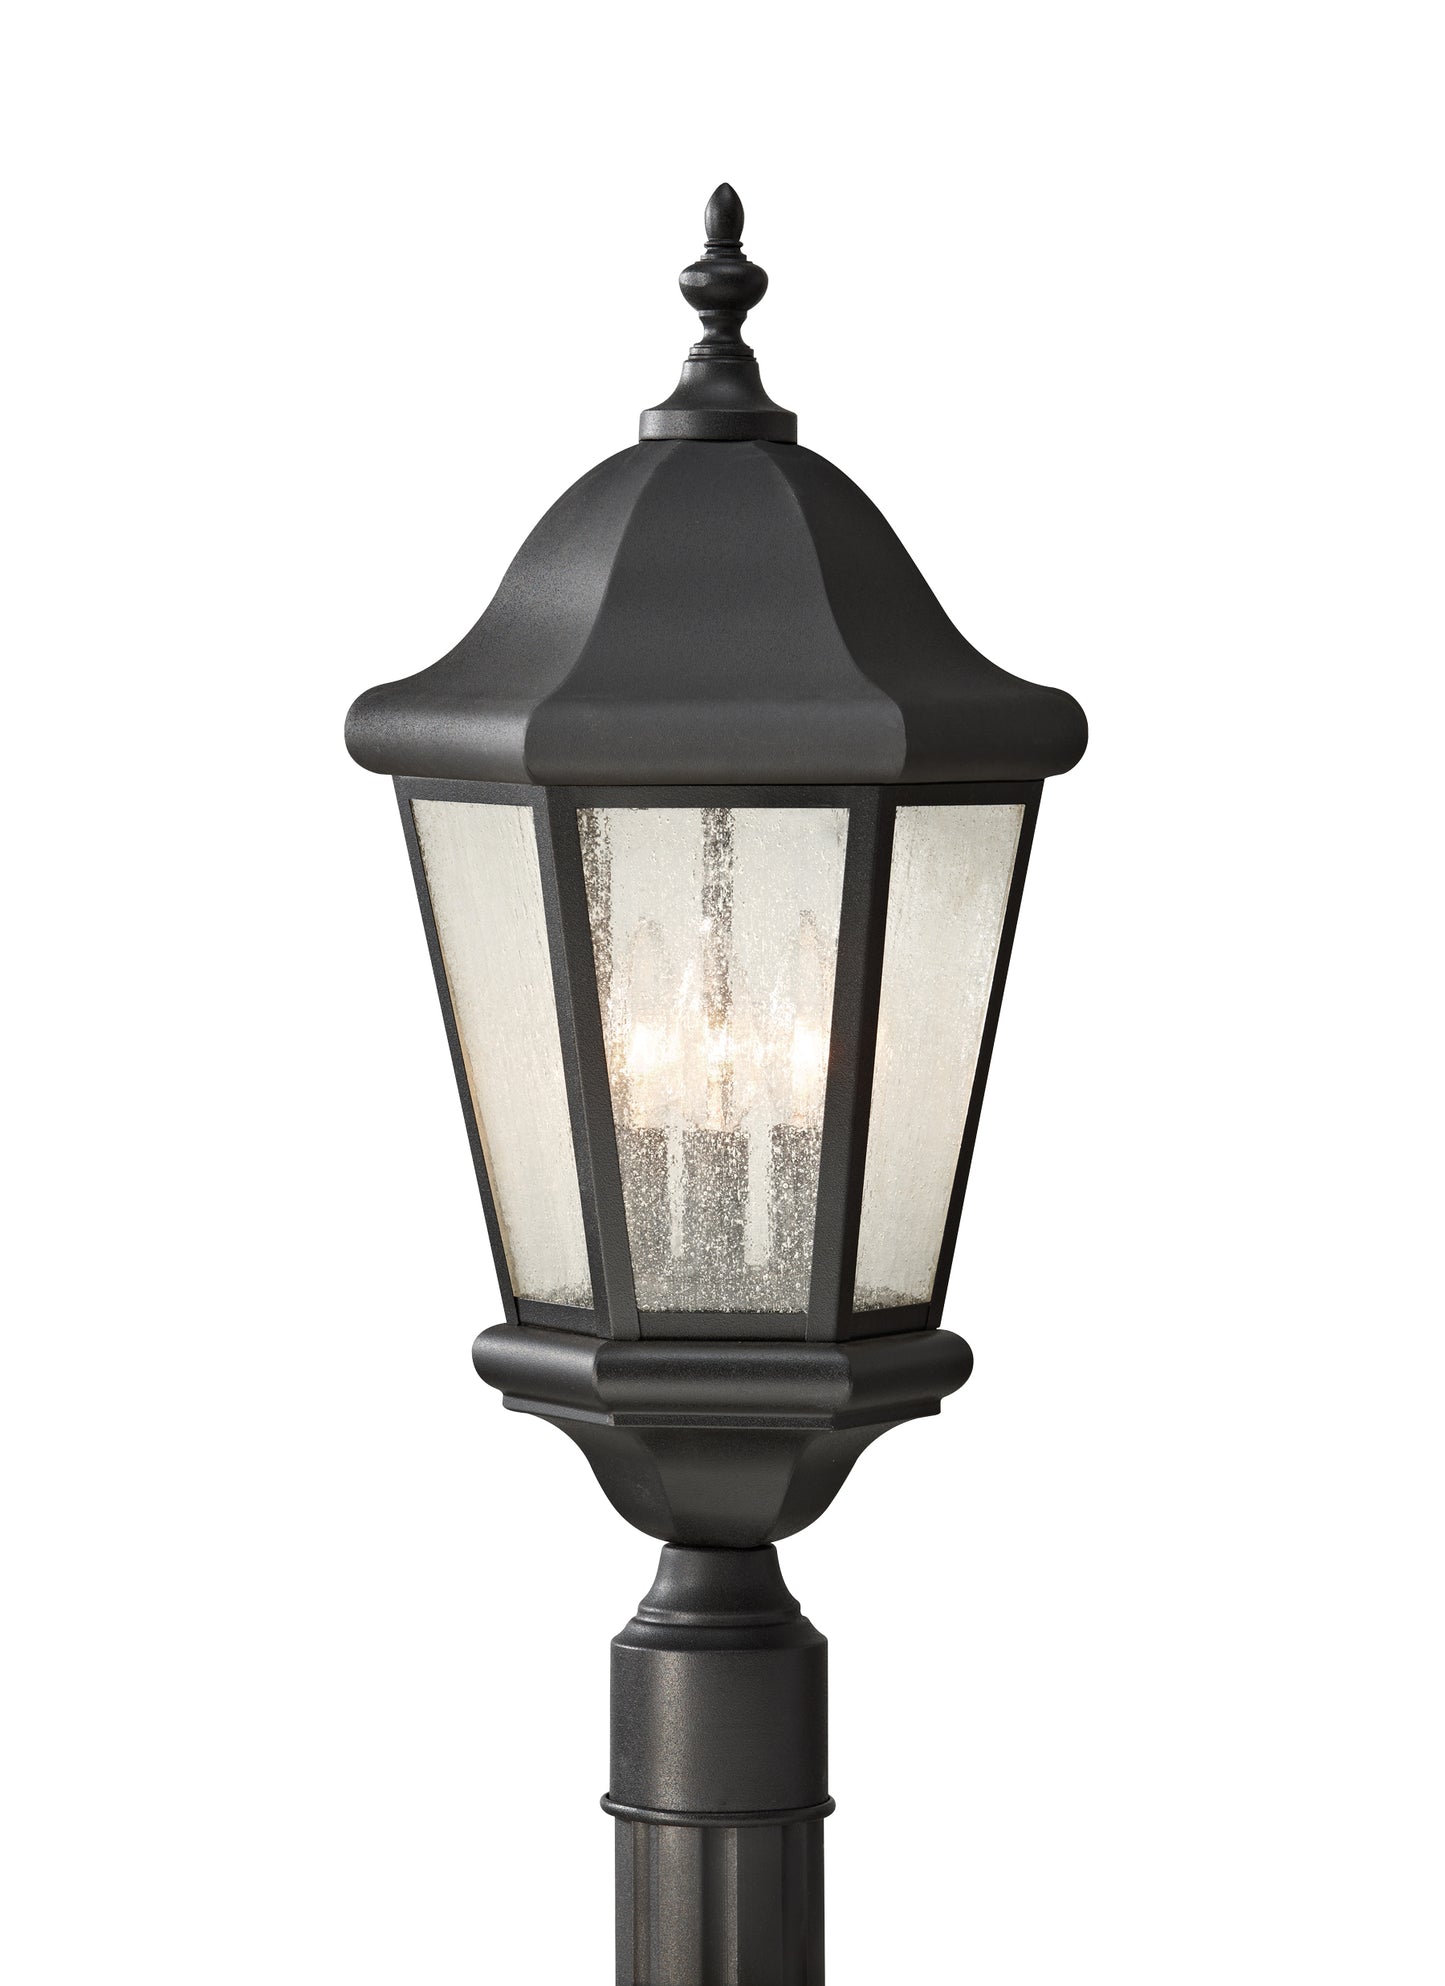 Martinsville traditional 3-light outdoor exterior post lantern in black finish with clear seeded glass shades